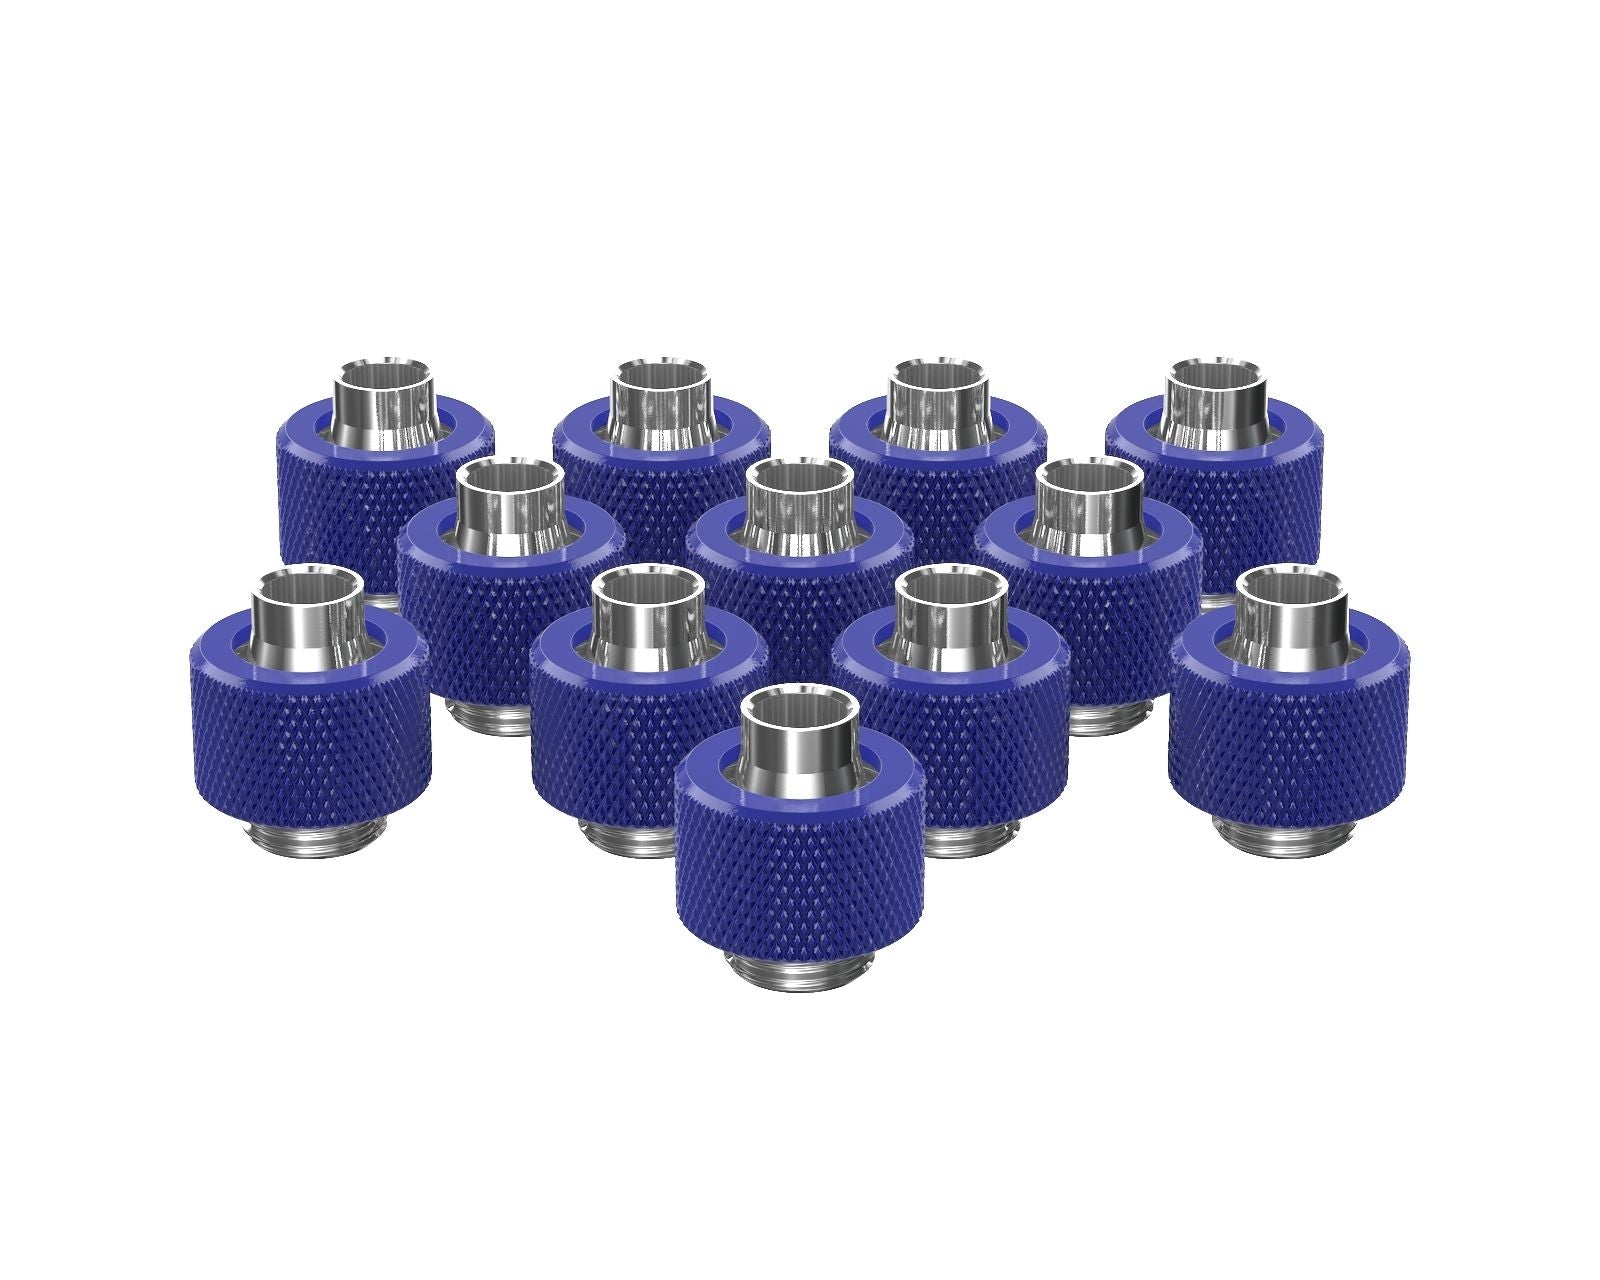 PrimoChill SecureFit SX - Premium Compression Fitting For 3/8in ID x 1/2in OD Flexible Tubing 12 Pack (F-SFSX12-12) - Available in 20+ Colors, Custom Watercooling Loop Ready - True Blue